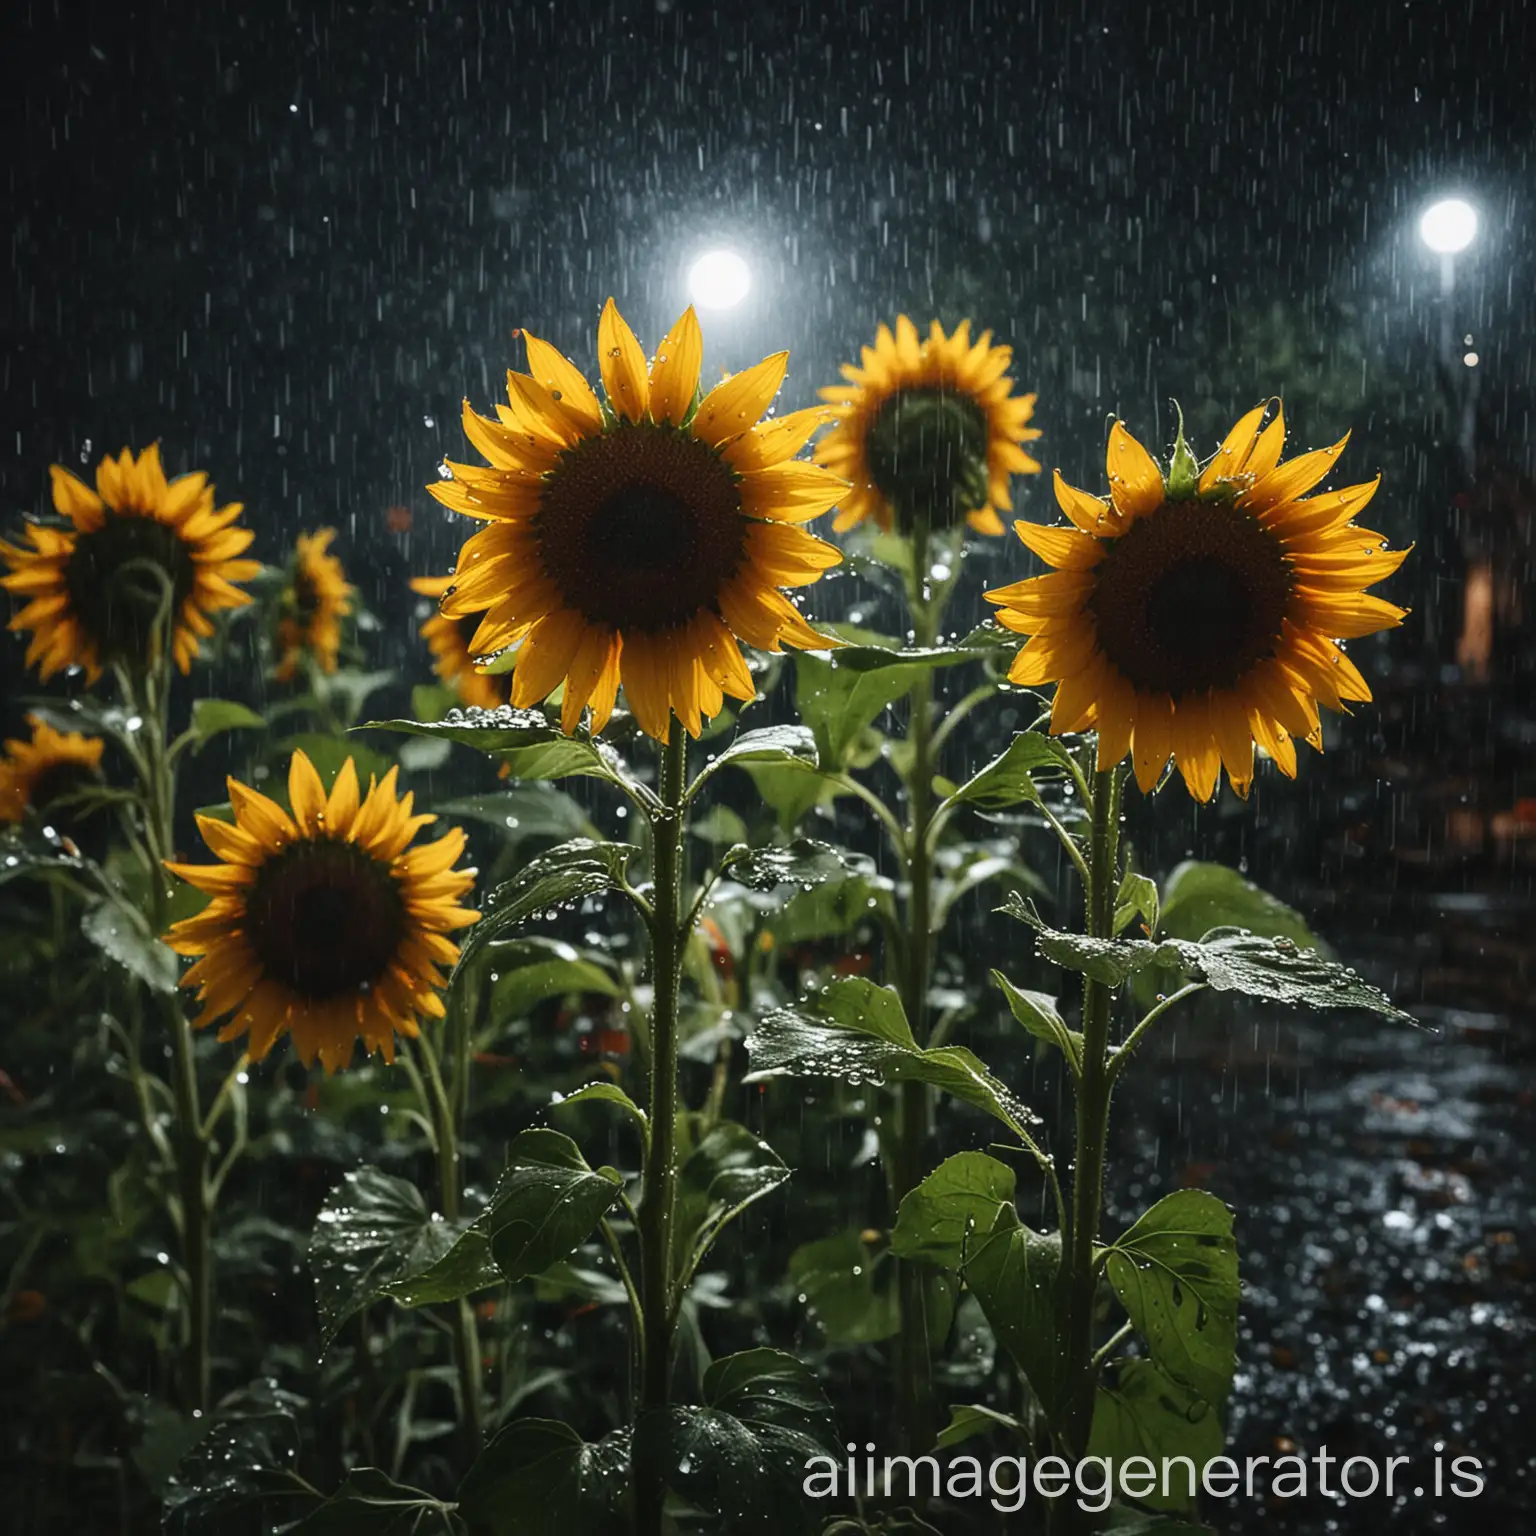 Sunflowers-Blooming-in-a-Rainy-Night-Garden